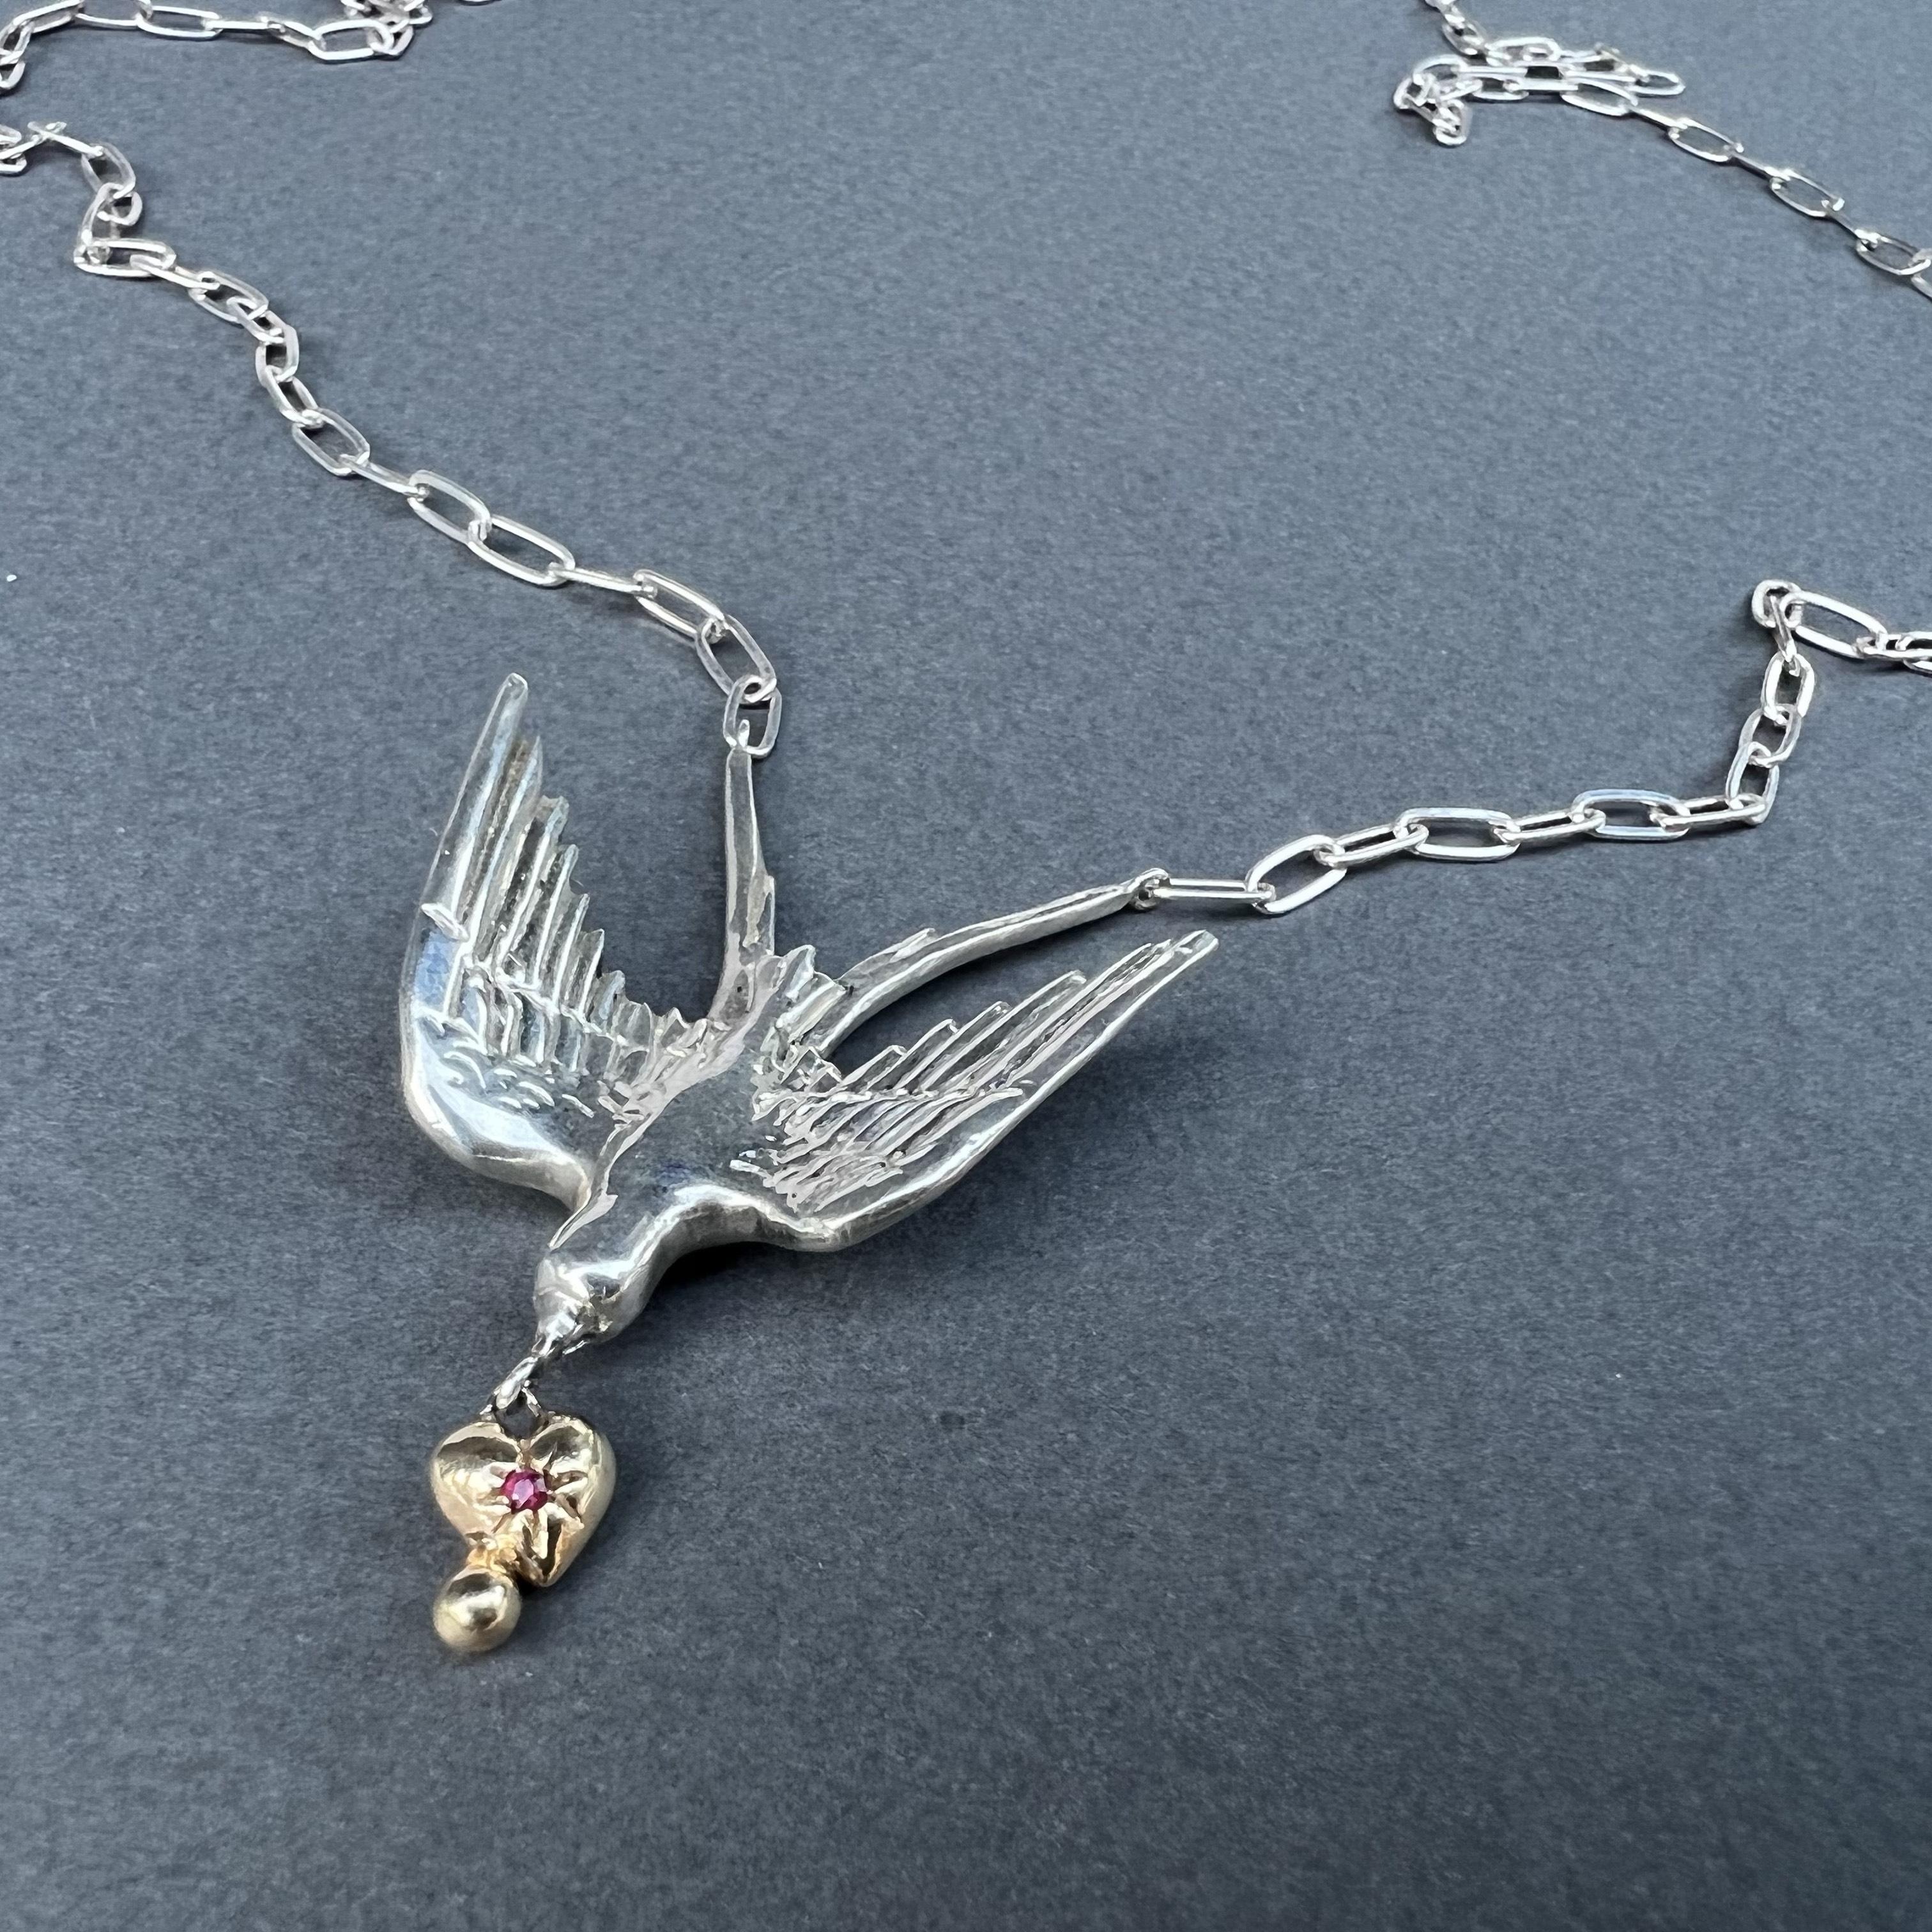 Brilliant Cut Heart Dove Necklace Gold Silver Chain Ruby Victorian Style J Dauphin For Sale